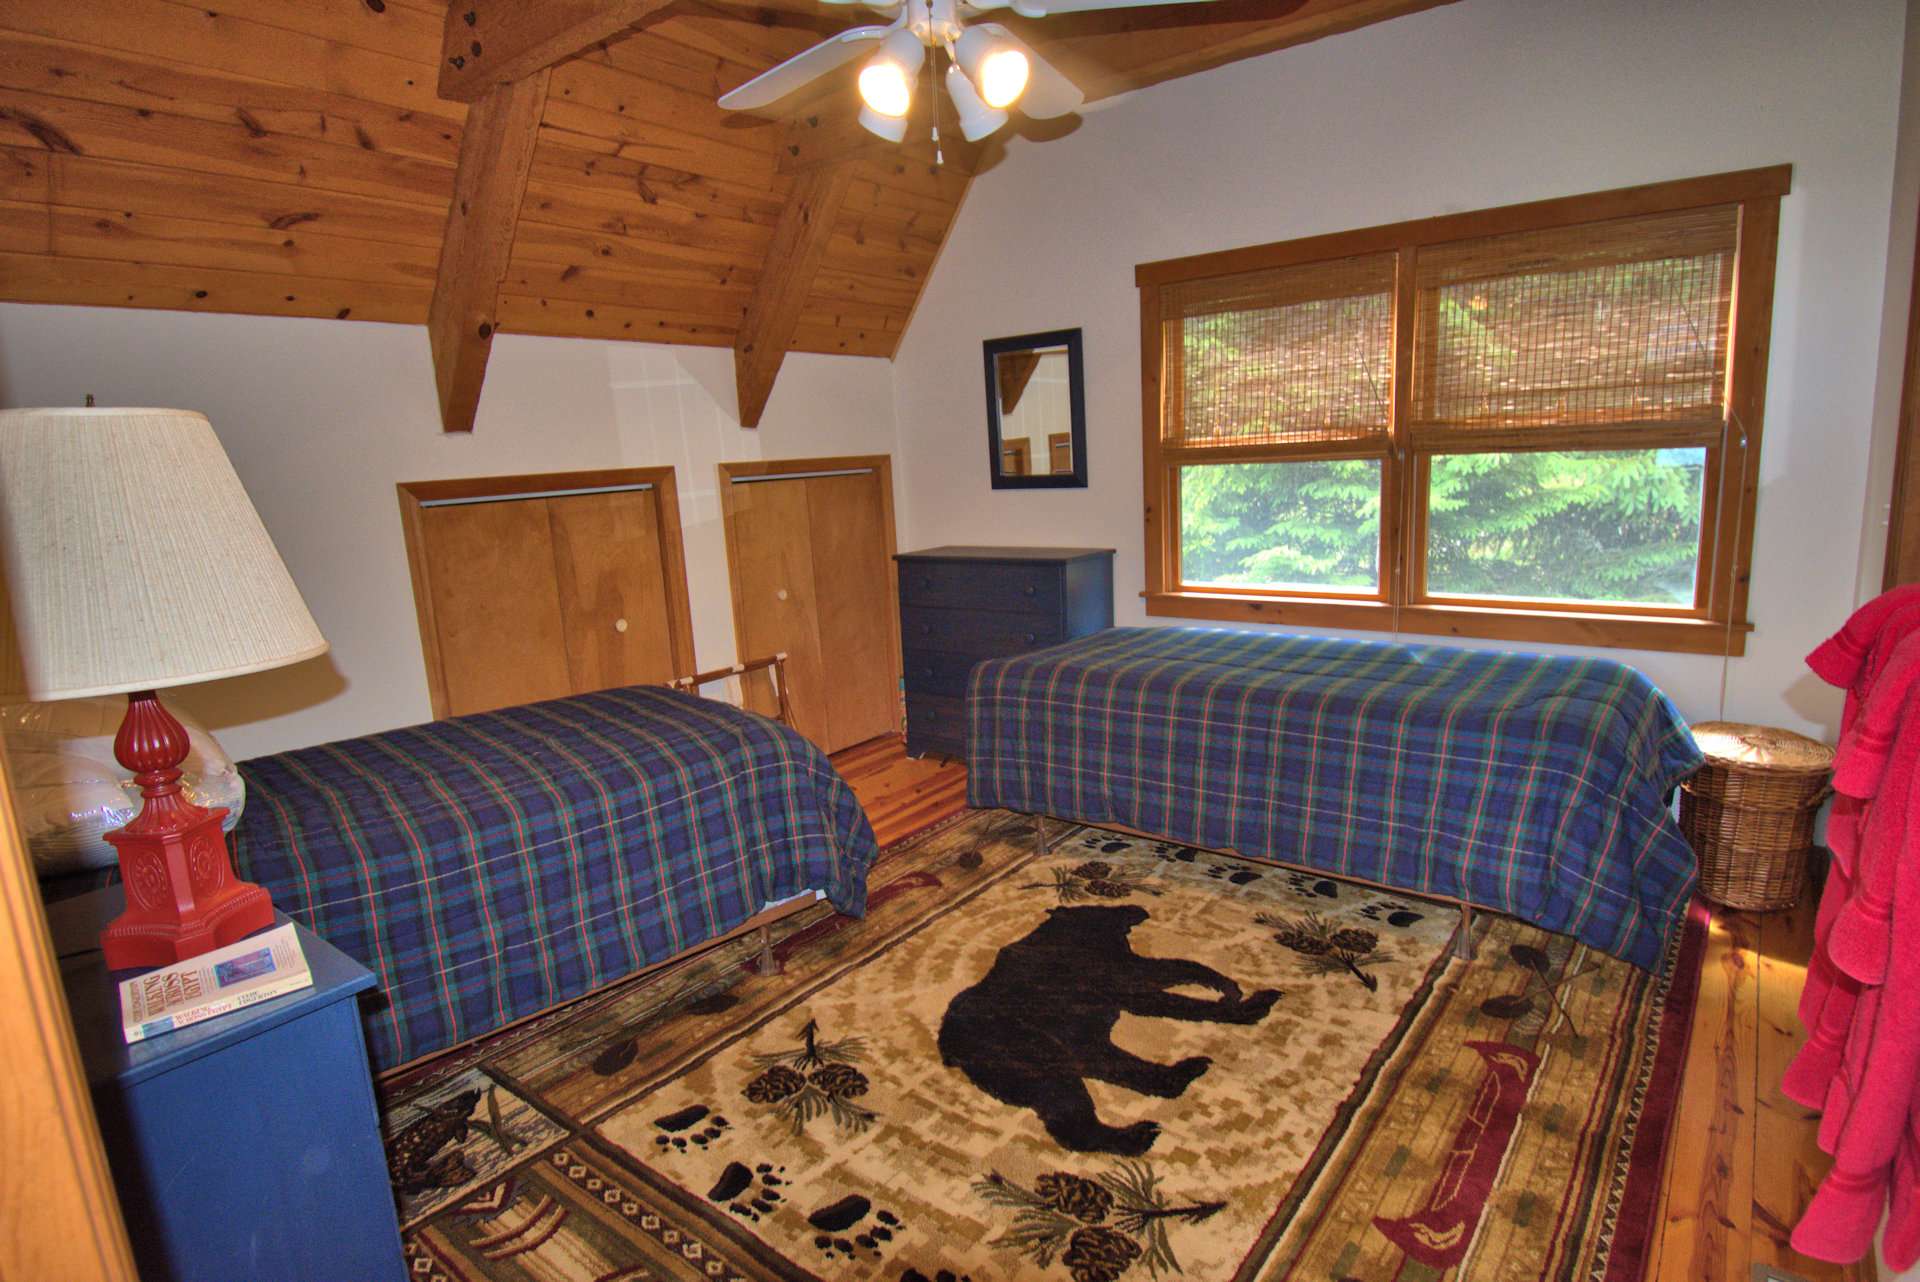 The upper level also offers the second bedroom with private bath, a great option for the master suite.